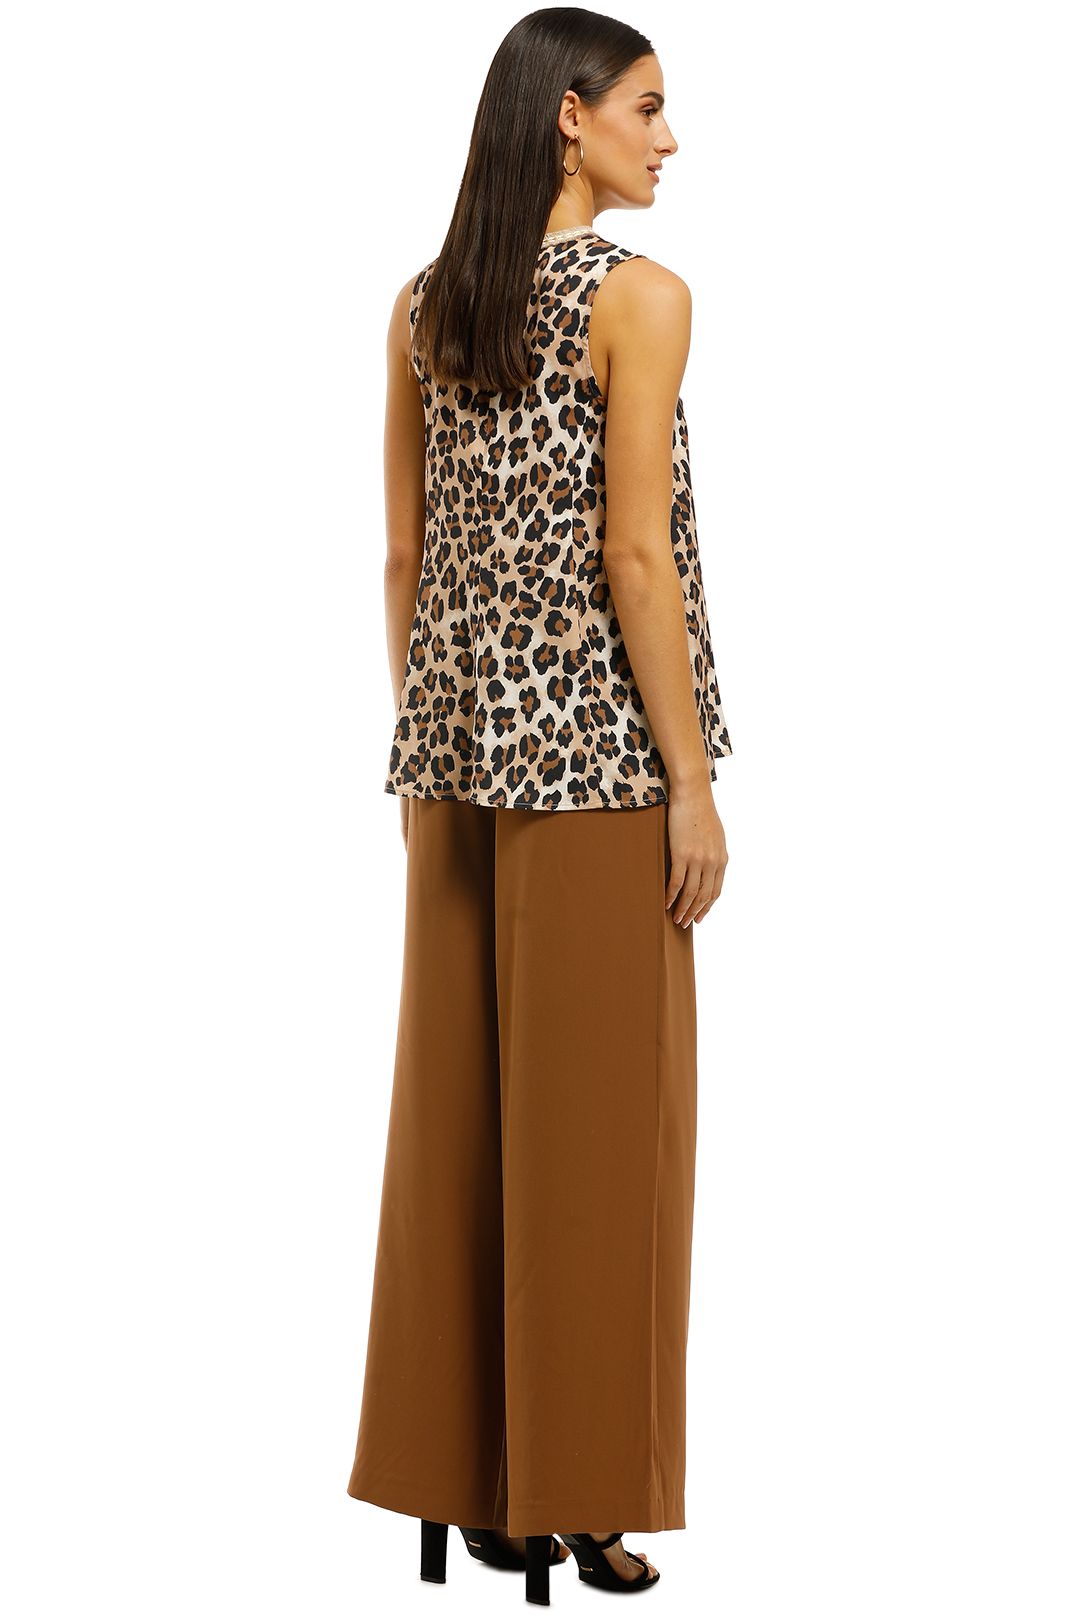 Cooper-by-Trelise-Cooper-Into-The-Wild-Top-Leopard-Back